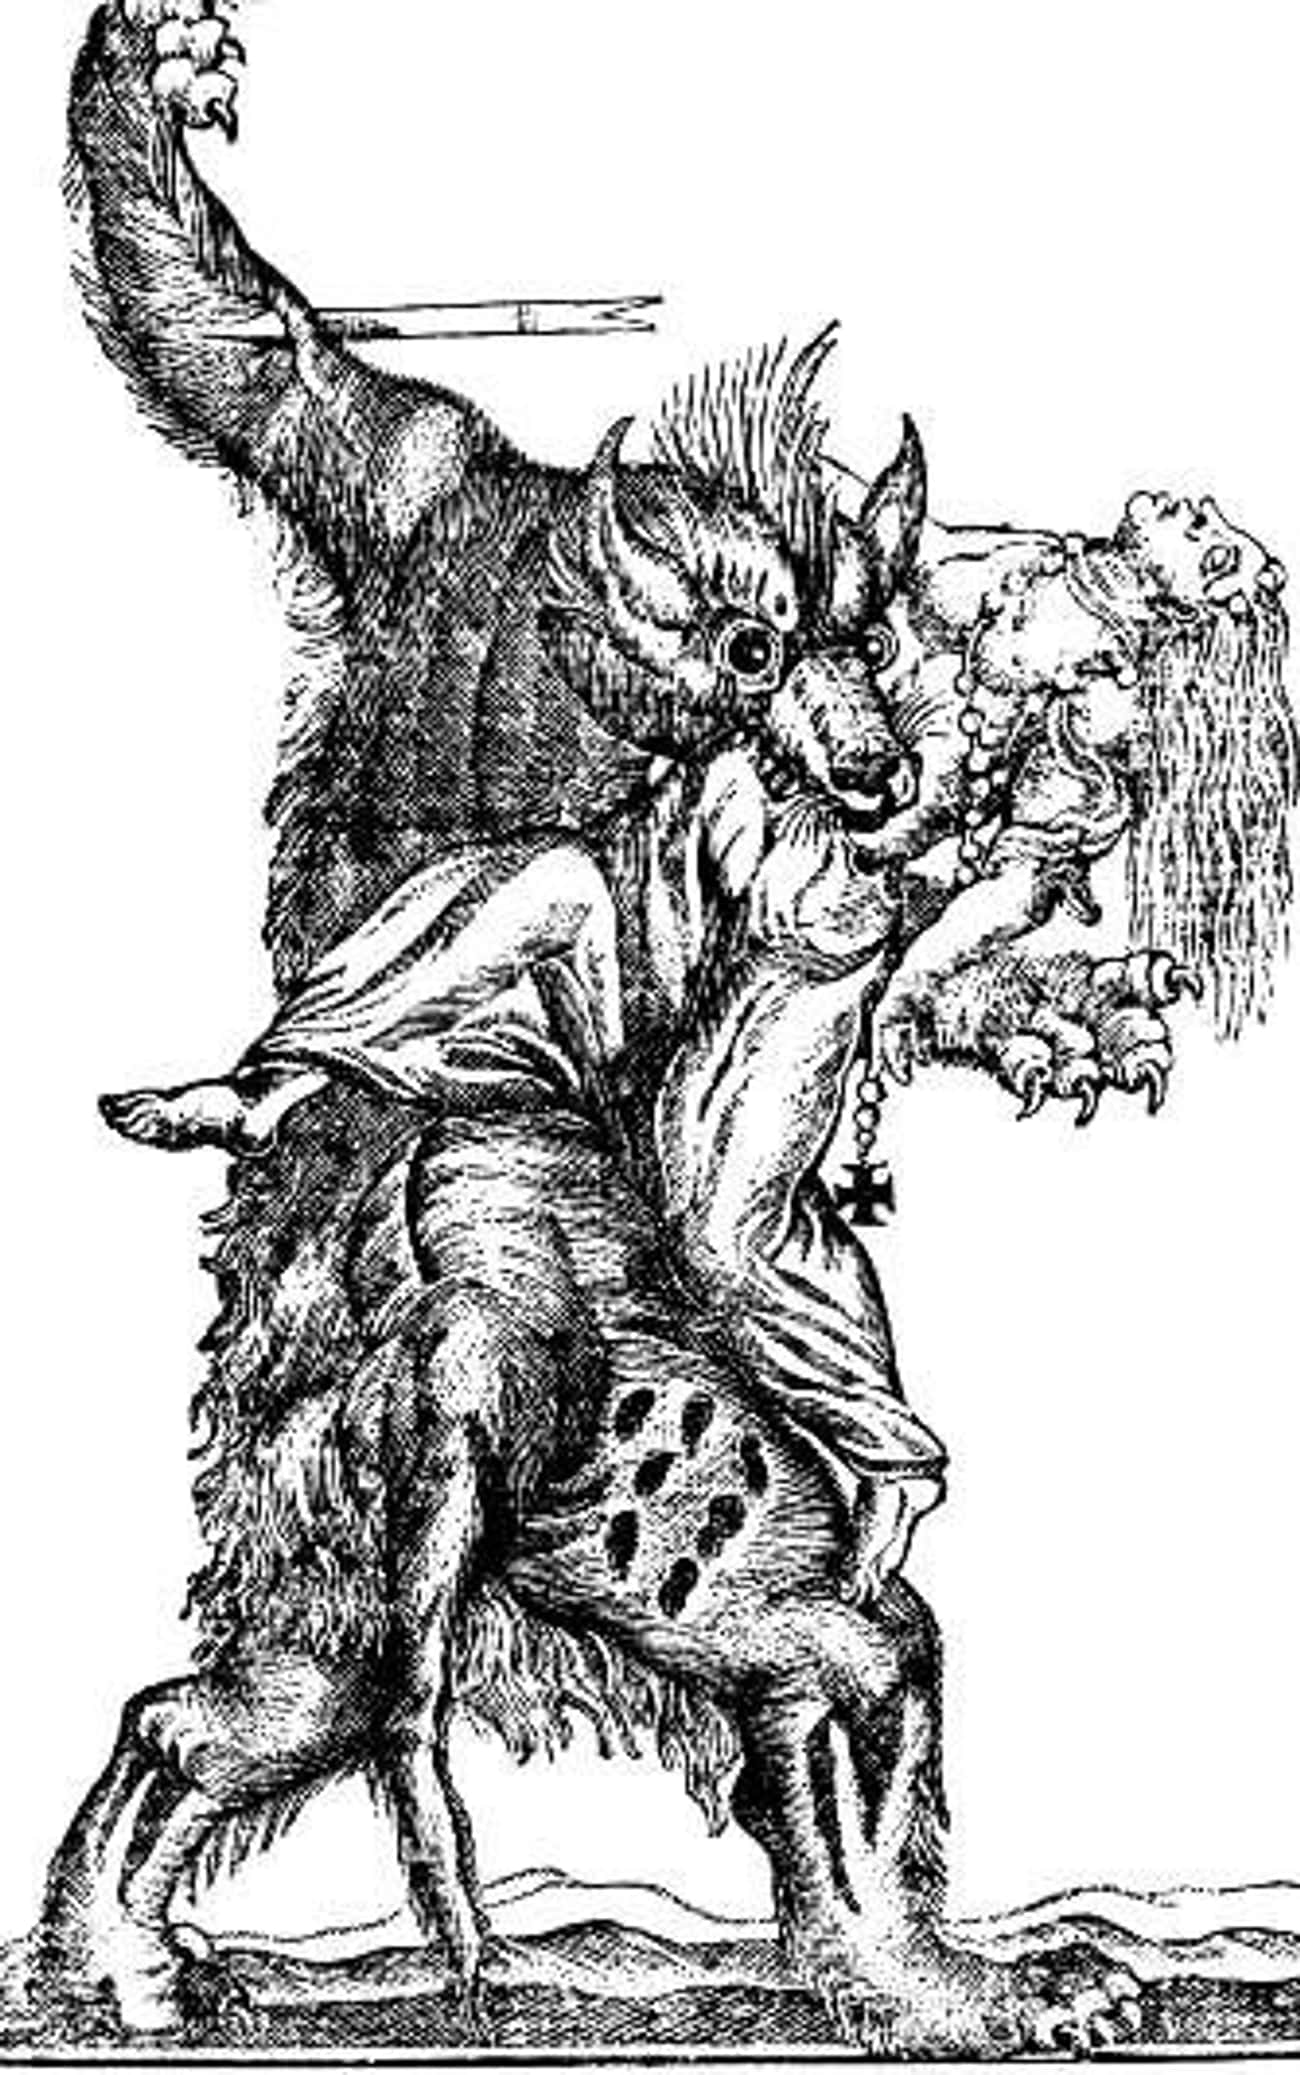 The Werewolf of Chalons Was So Evil He Was Nearly Erased From History